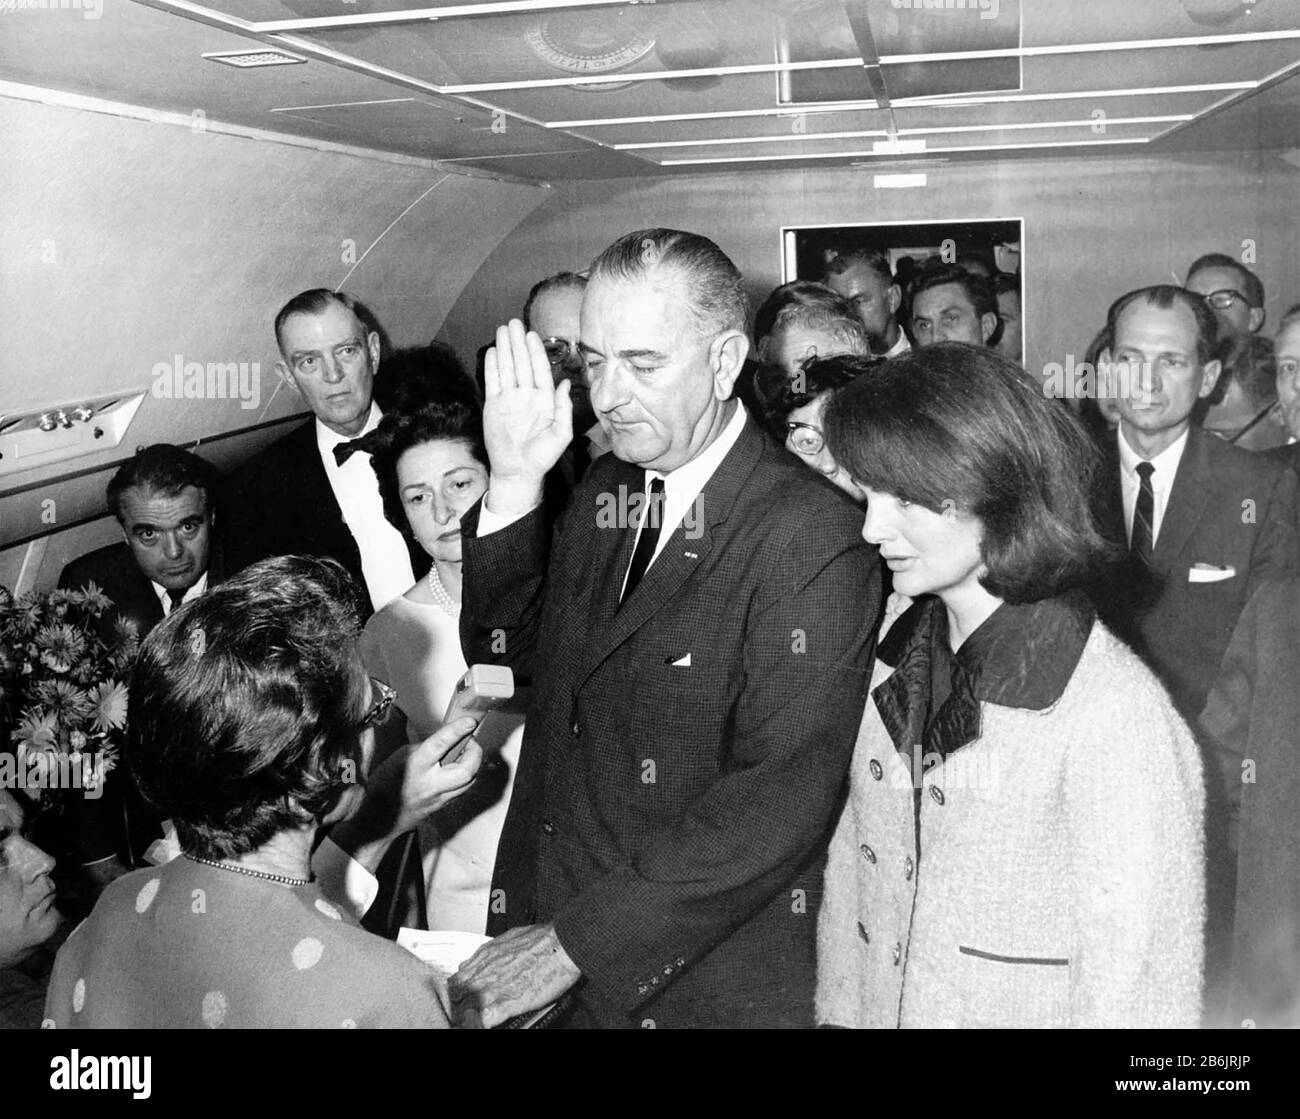 LYNDON B. JOHNSON is sworn in as US President aboard Air Force One on 22 November 1963 flanked by his wife at left and Jackie Kennedy. Photo: Cecil Stoughton Stock Photo